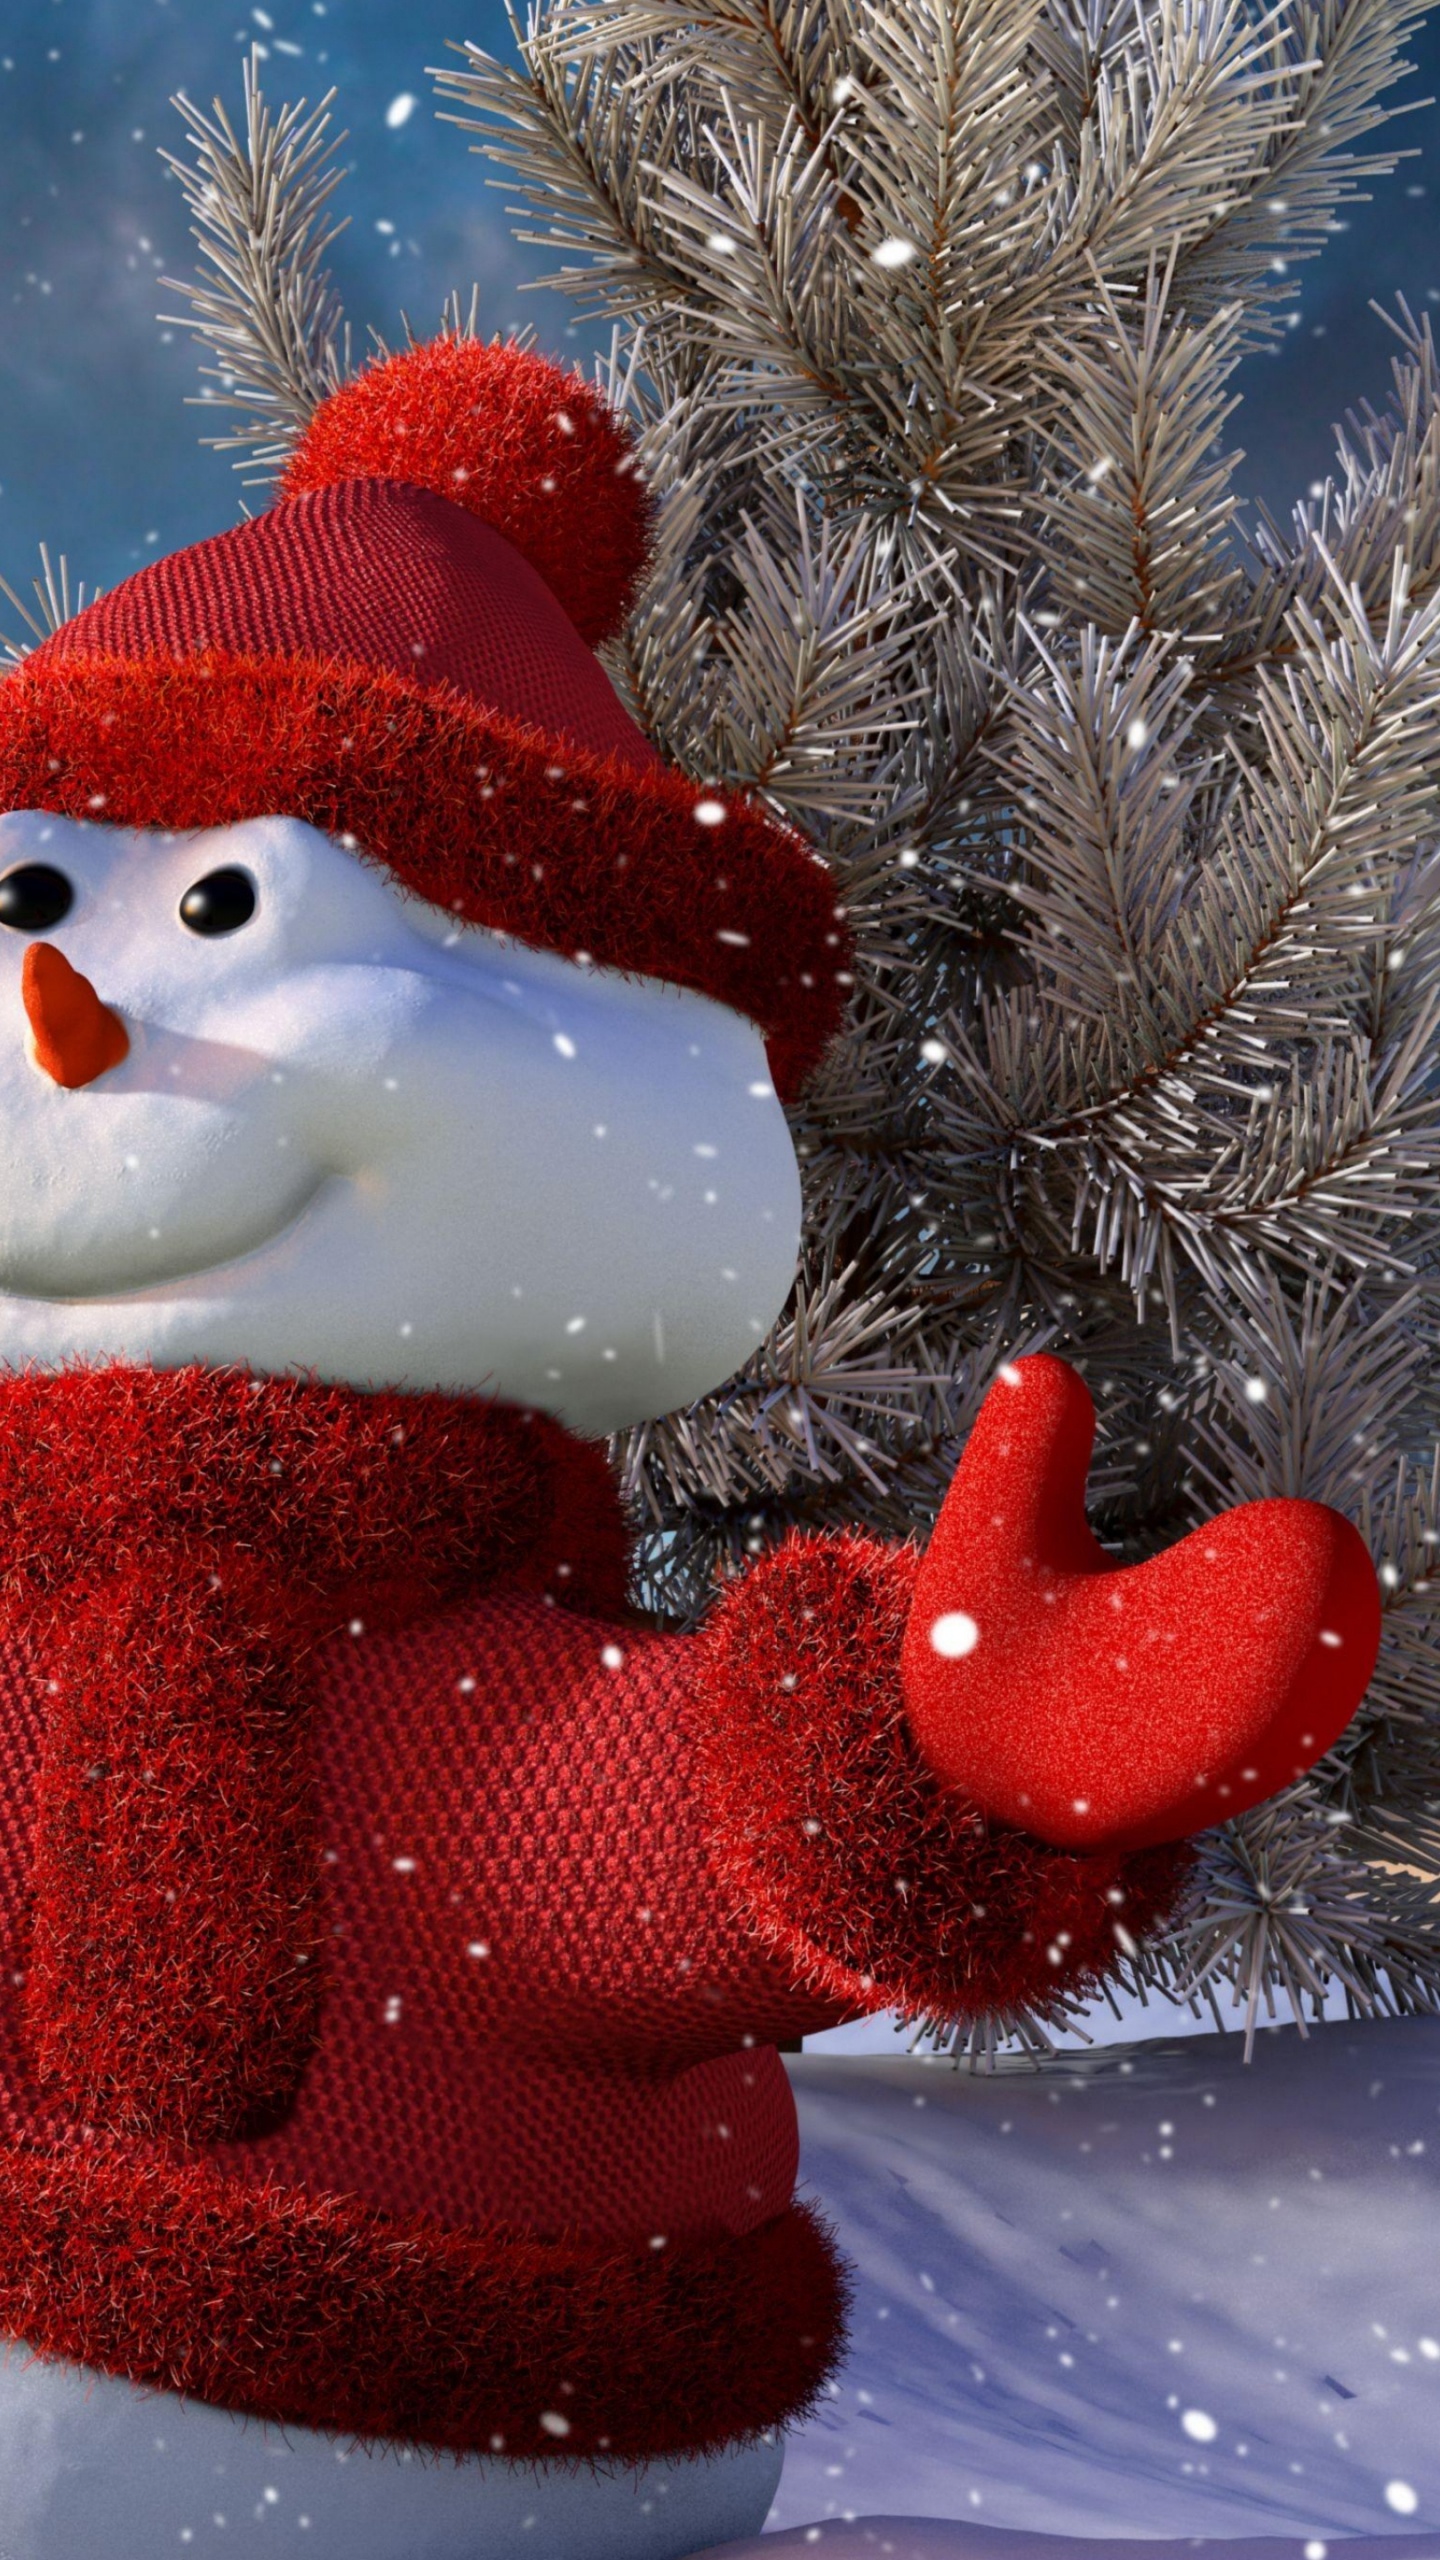 Snowman, Christmas, Space, Freezing, Christmas Tree. Wallpaper in 1440x2560 Resolution